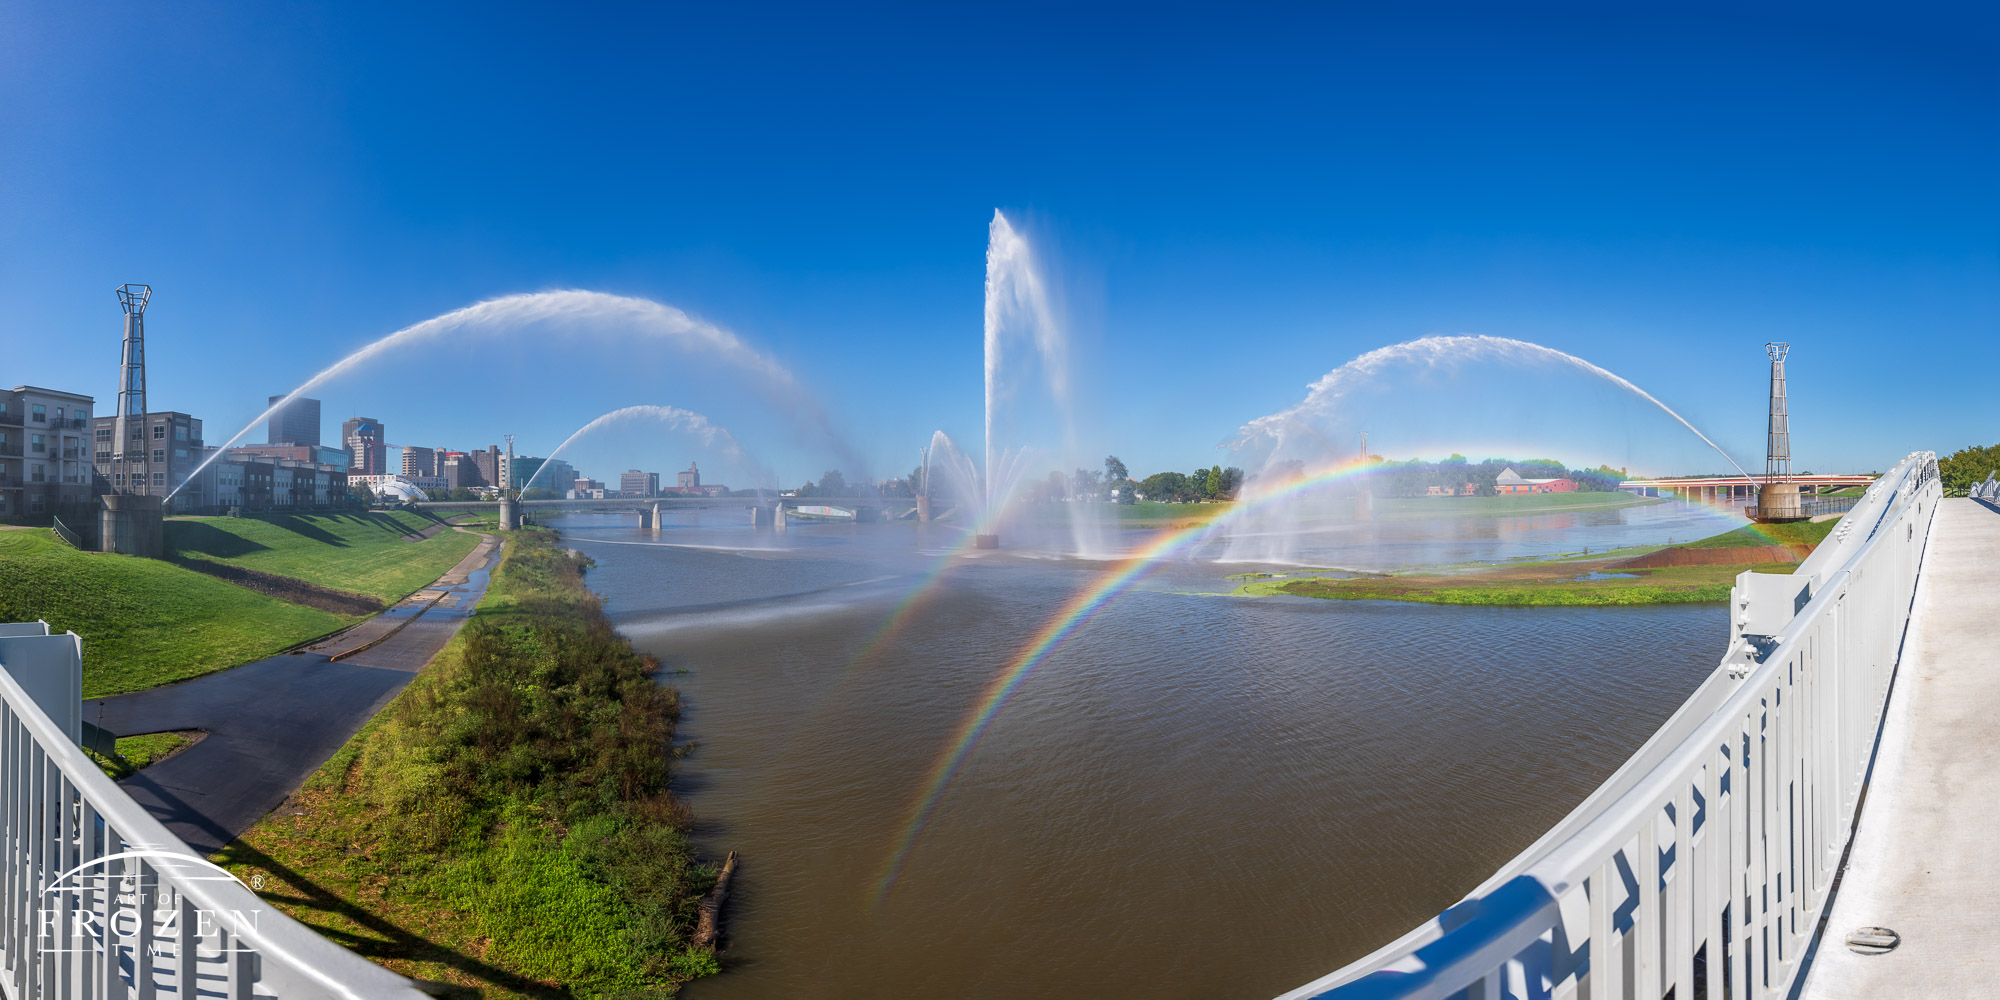 A panoramic view of one of the largest fountains in the world on an incredibly clear day over the Dayton Skyline